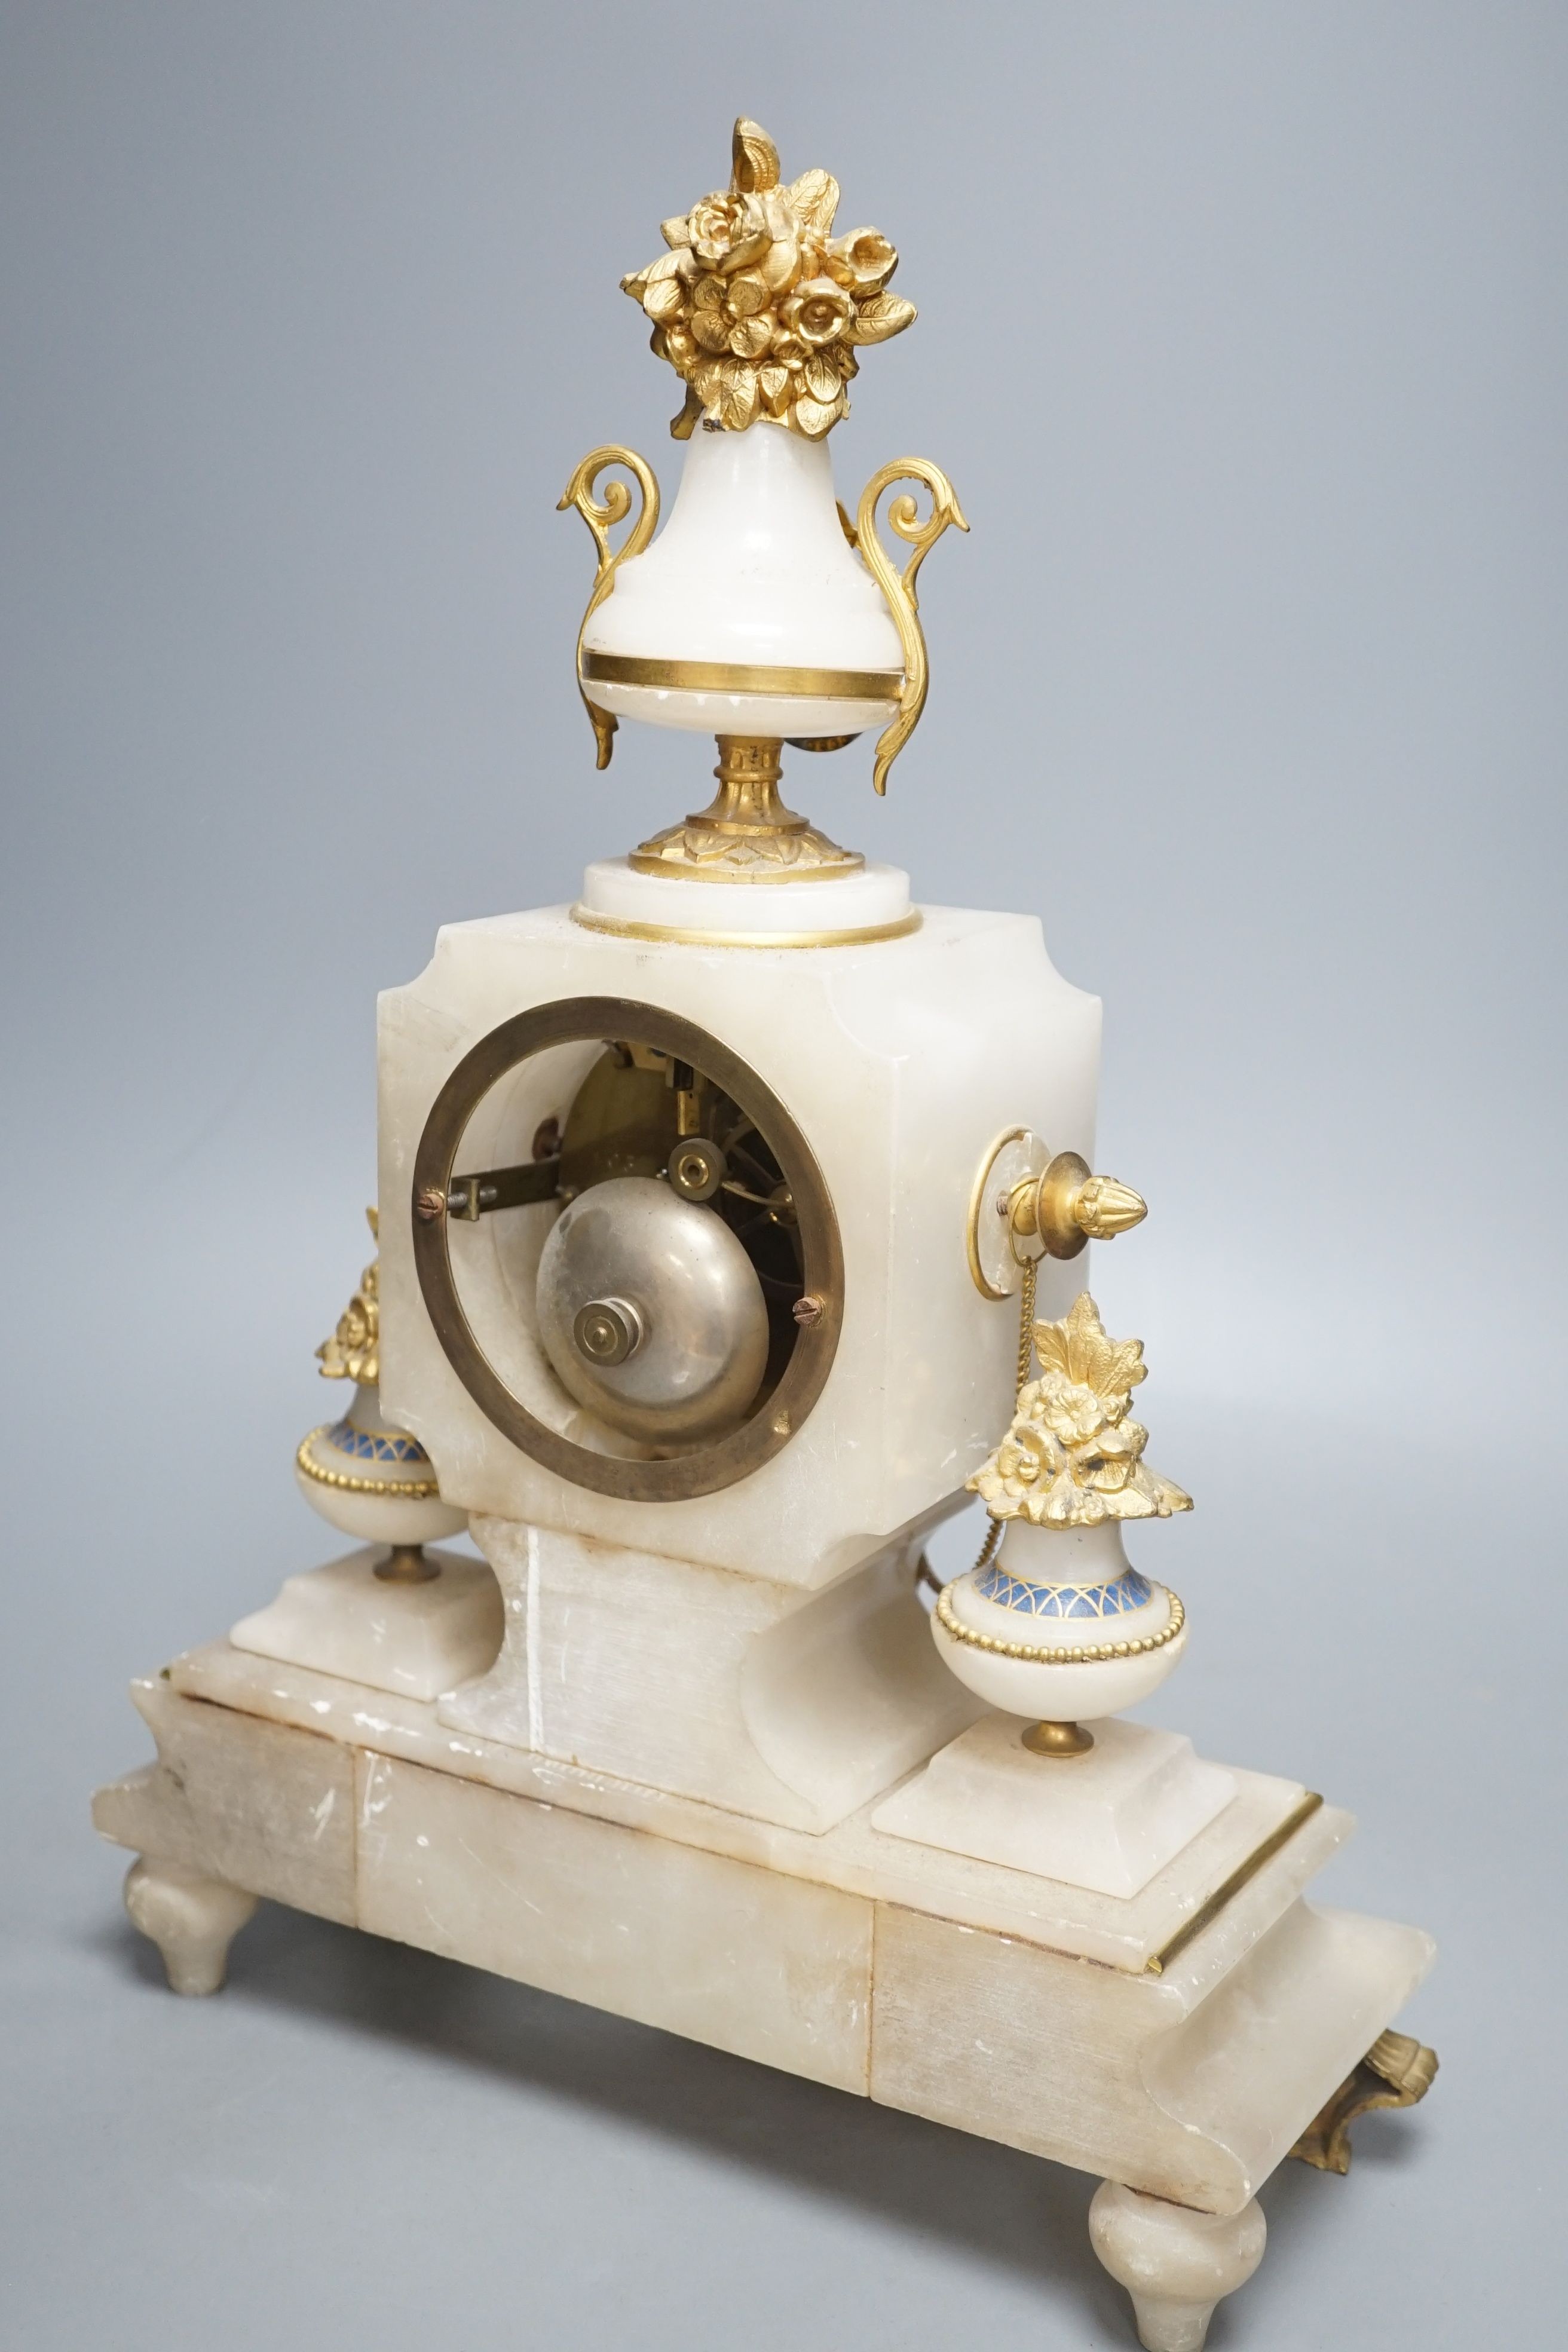 A late 19th century French alabaster and ormolu mounted mantel clock with key and pendulum - 39cm tall